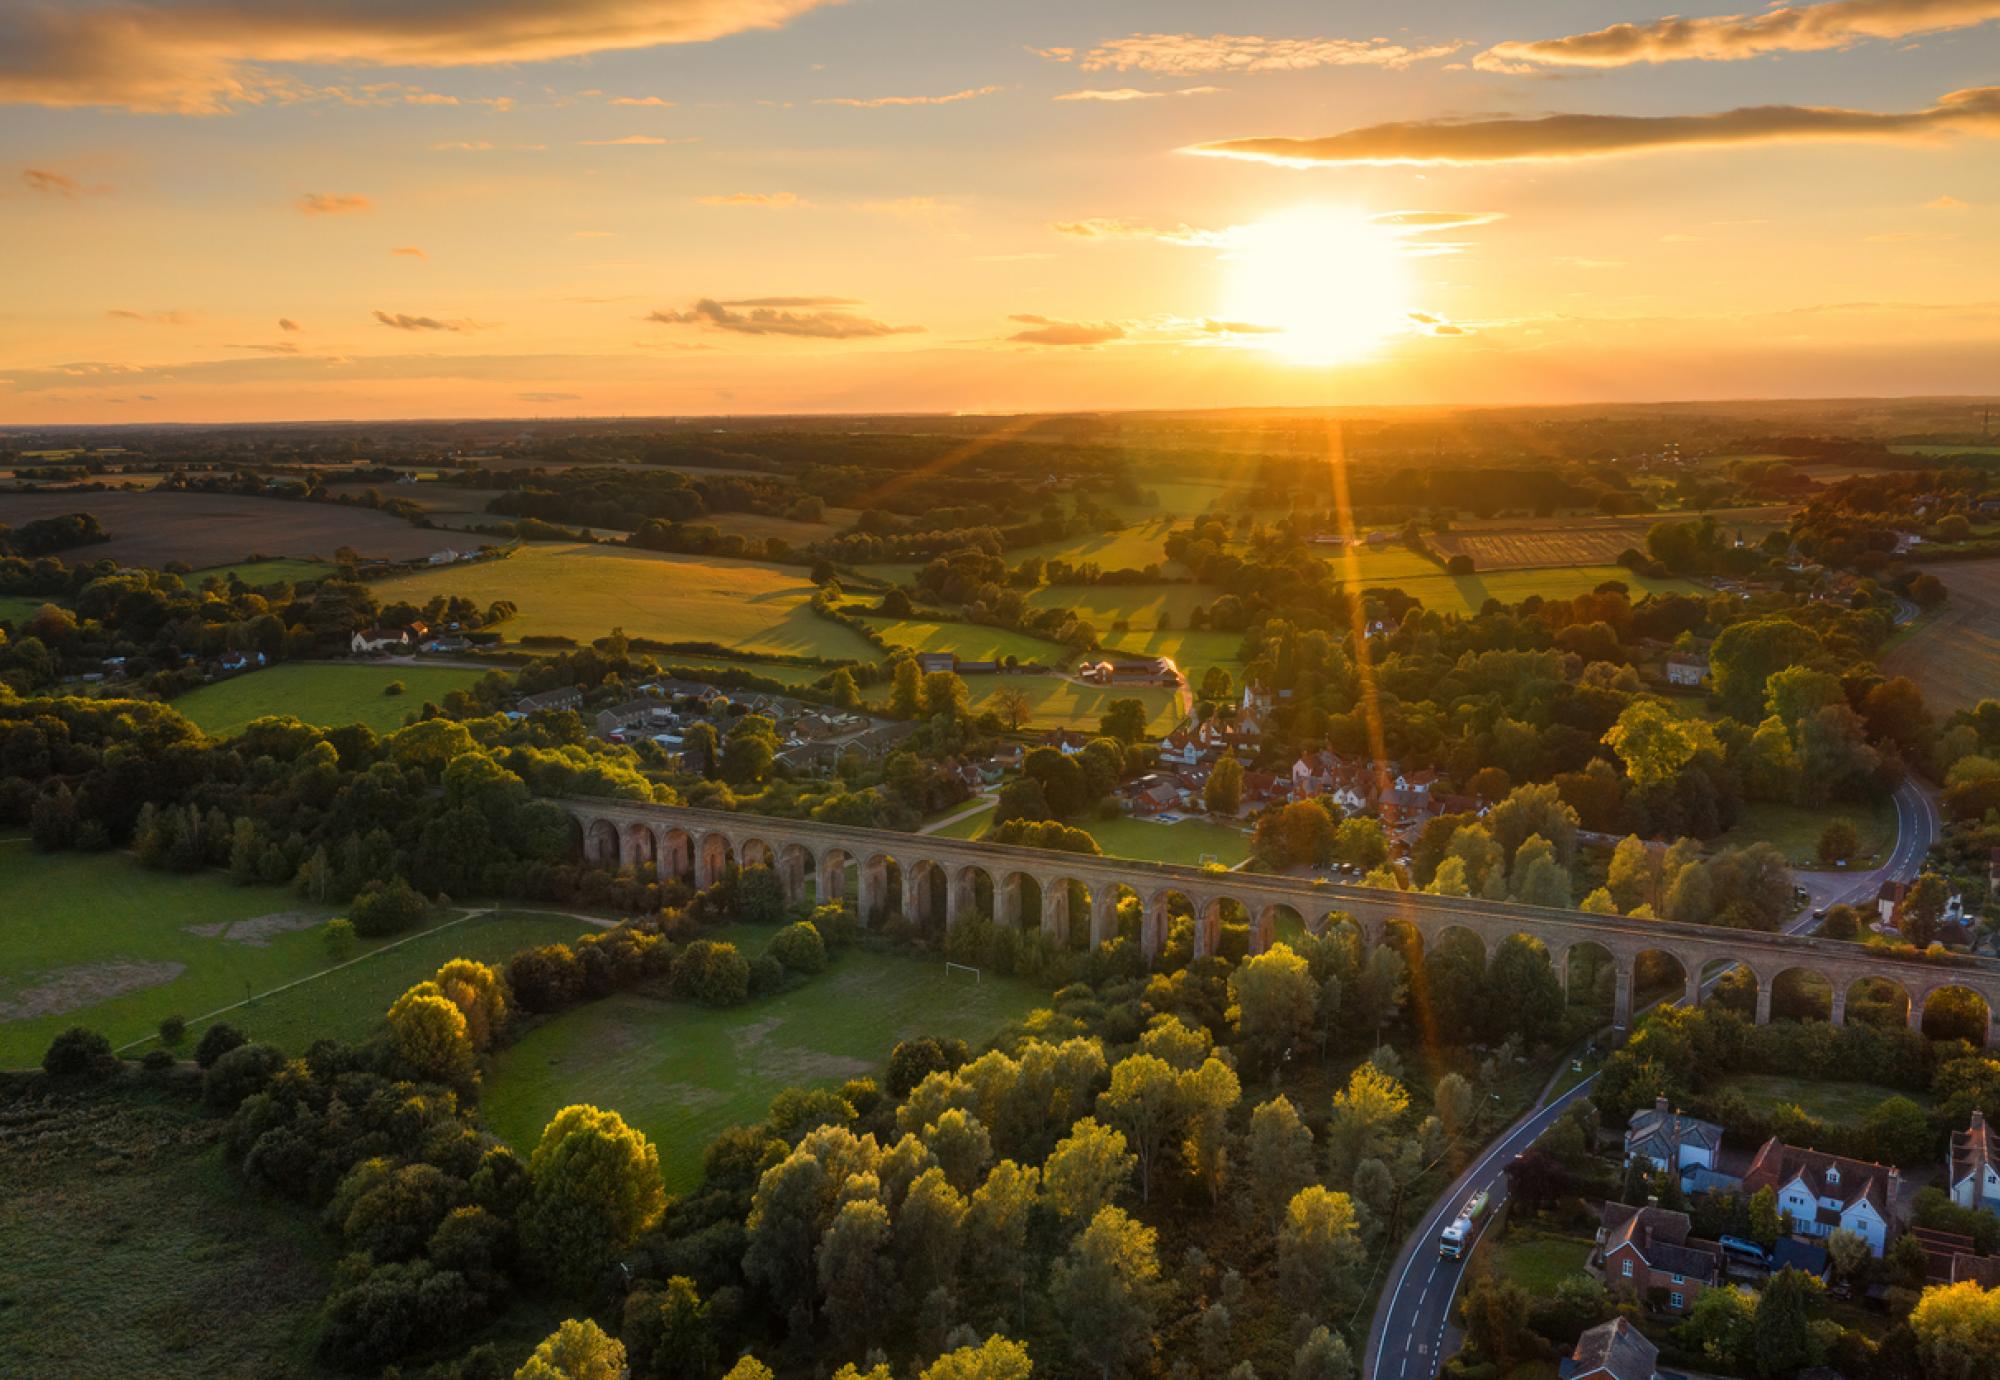 An aerial view of the Chappel and Wakes Colne viaduct in the English county of Essex, via Istock